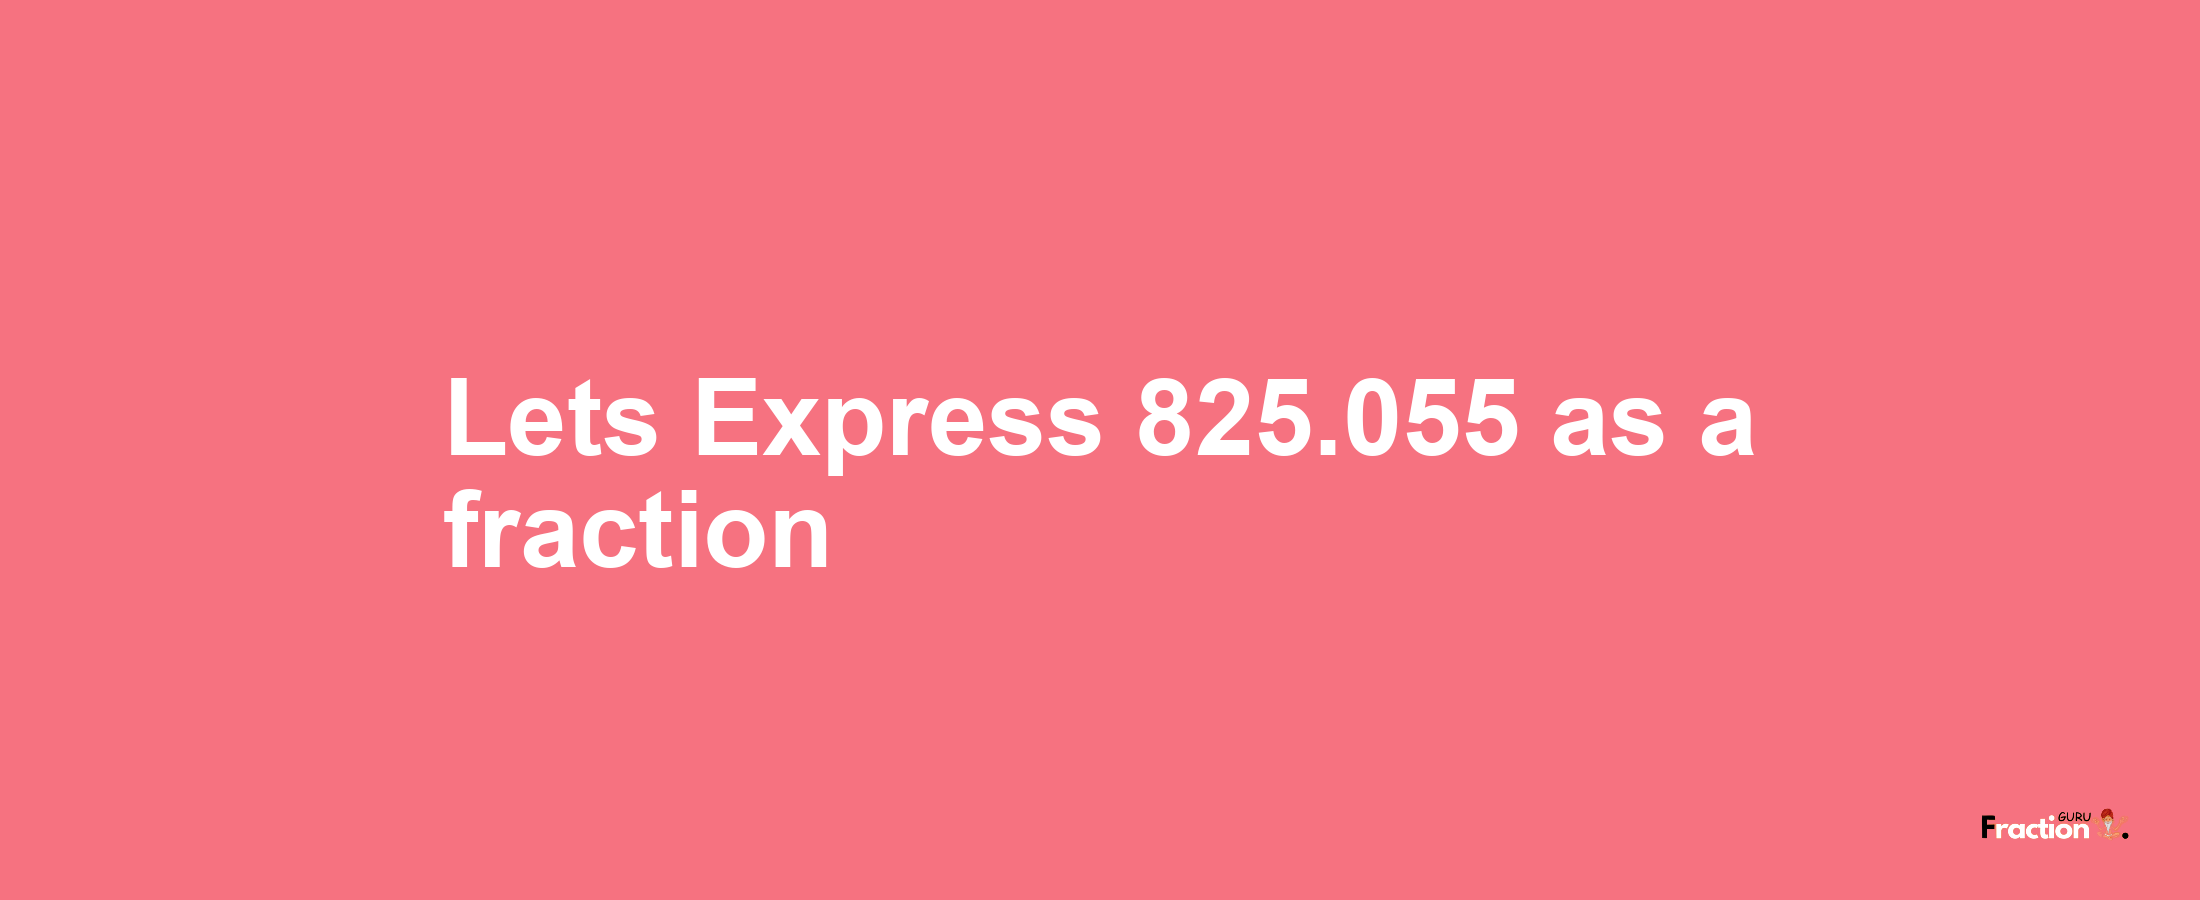 Lets Express 825.055 as afraction